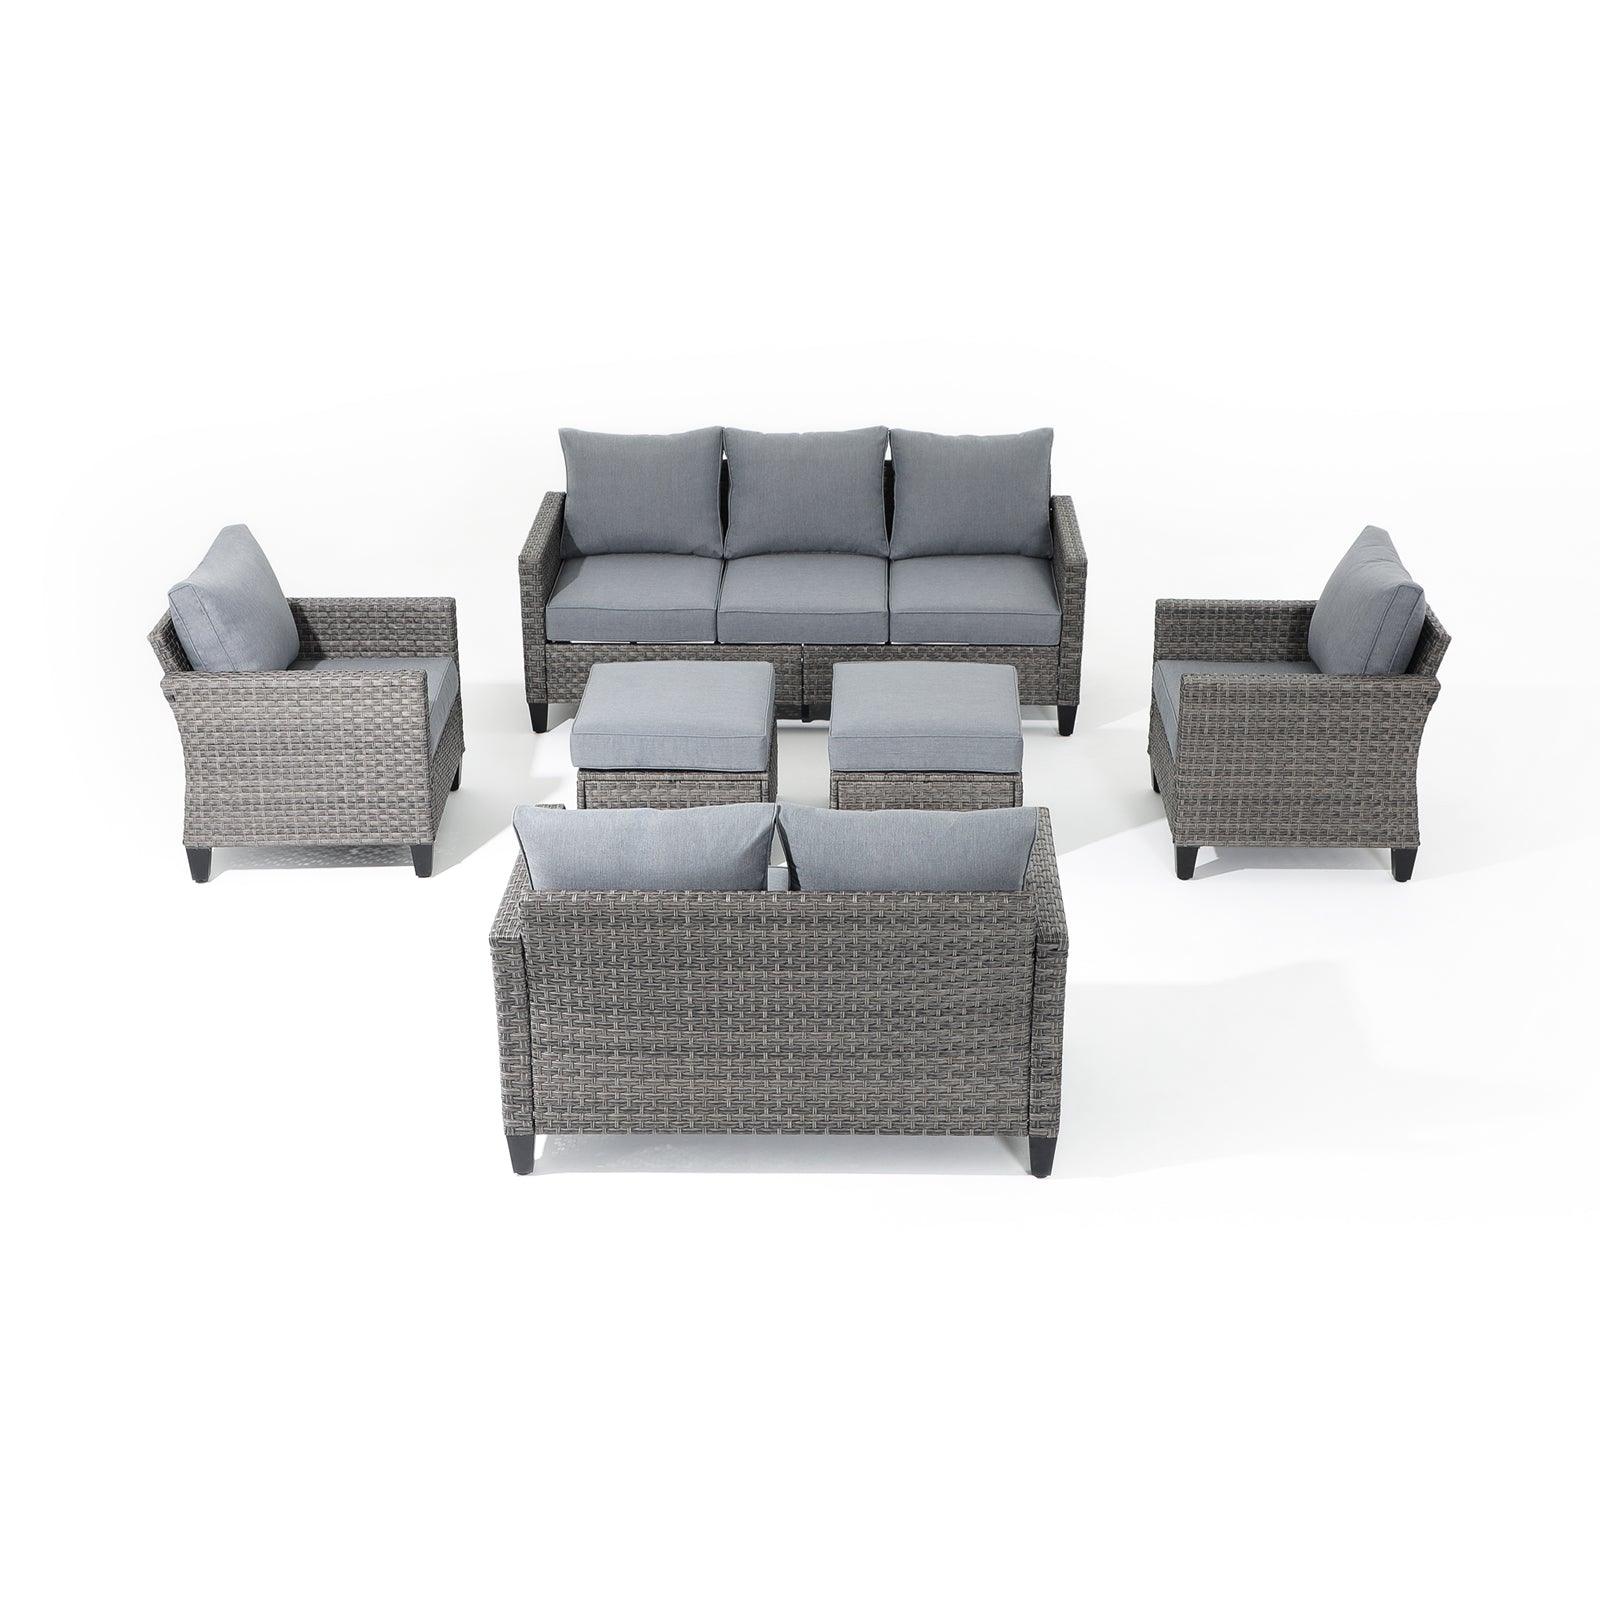 Ayia 6-Piece Grey outdoor Sofa Set with Rattan design, grey cushions, a 3-seater sofa, 2 arm chairs , 2 ottomans, 1 loveseat- Jardina Furniture #color_Grey#piece_6-pc. with ottomans